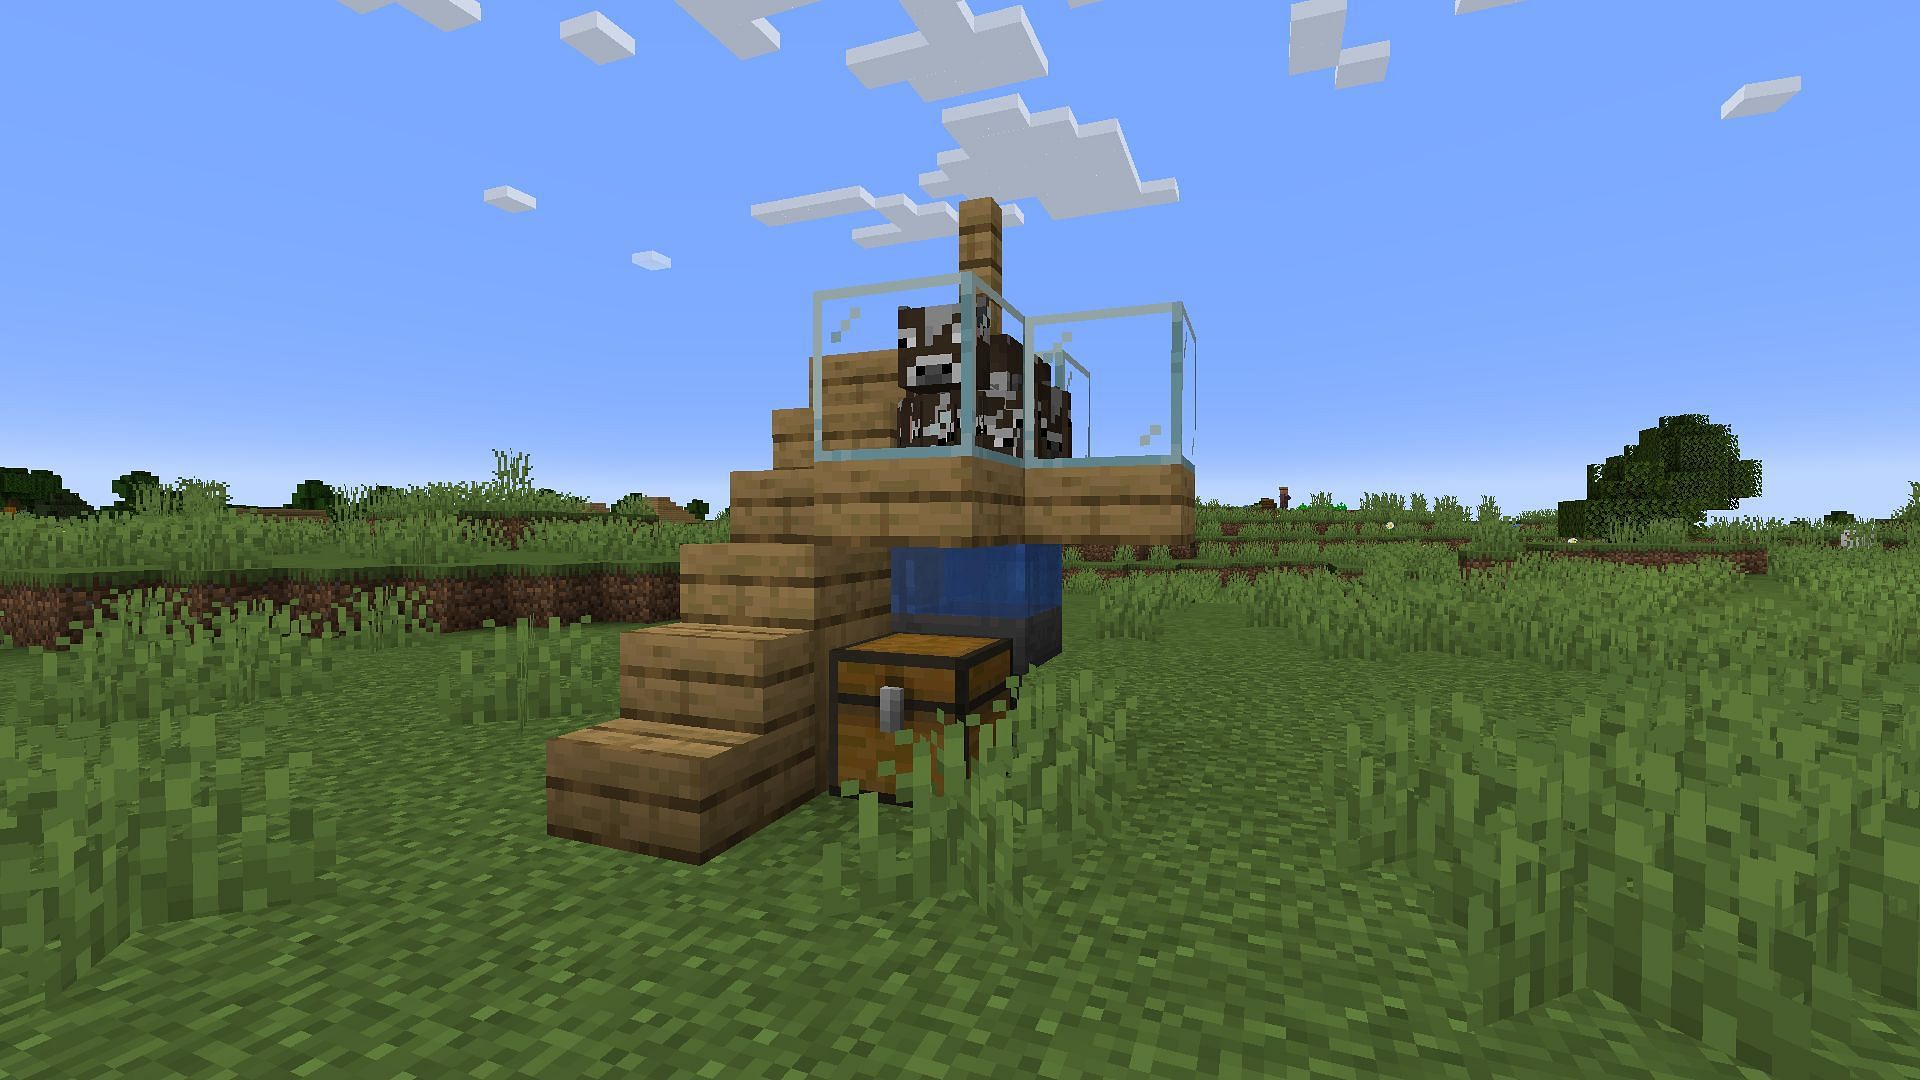 A basic semi-auto cow farm design in Minecraft, also known as a cow crusher (Image via Mojang)